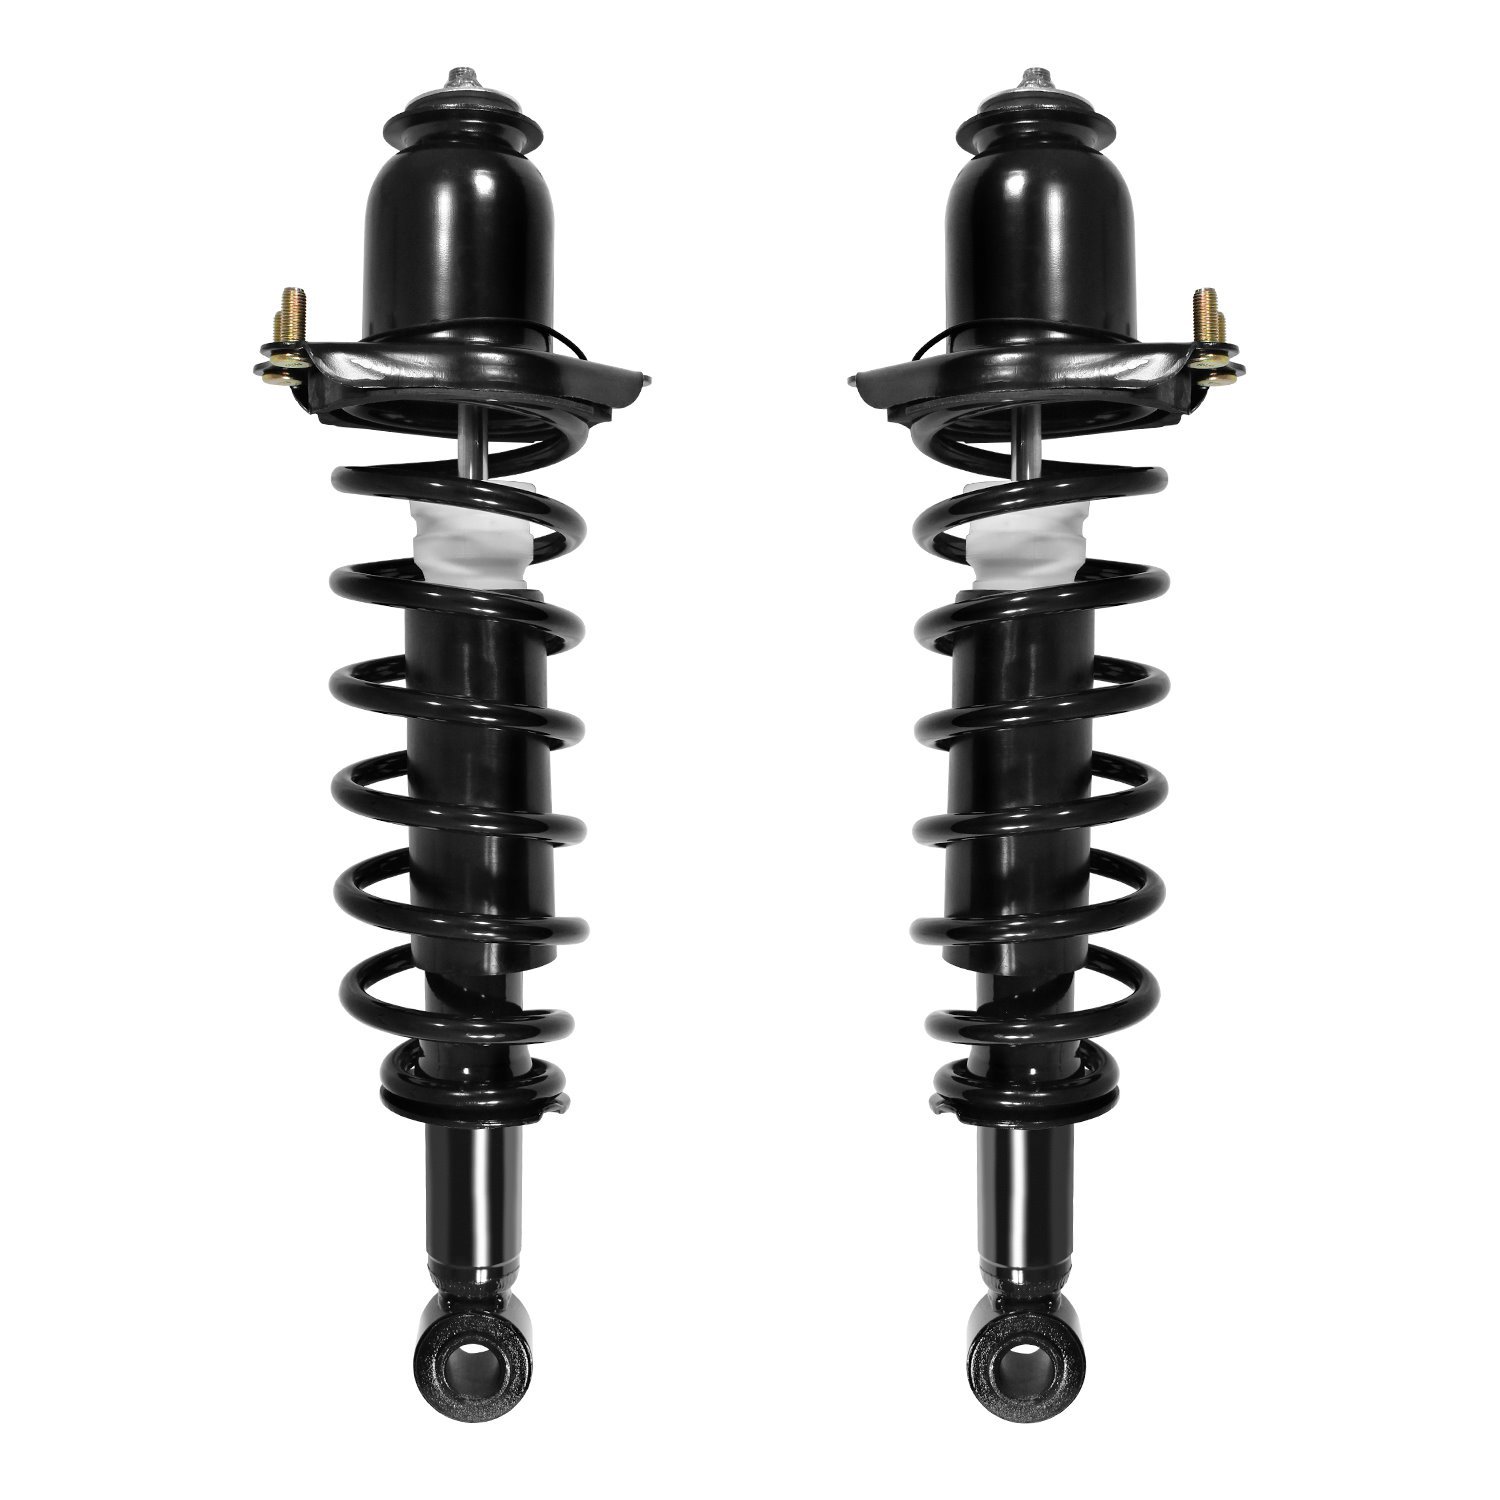 2-15320-001 Suspension Strut & Coil Spring Assembly Set Fits Select Toyota Prius